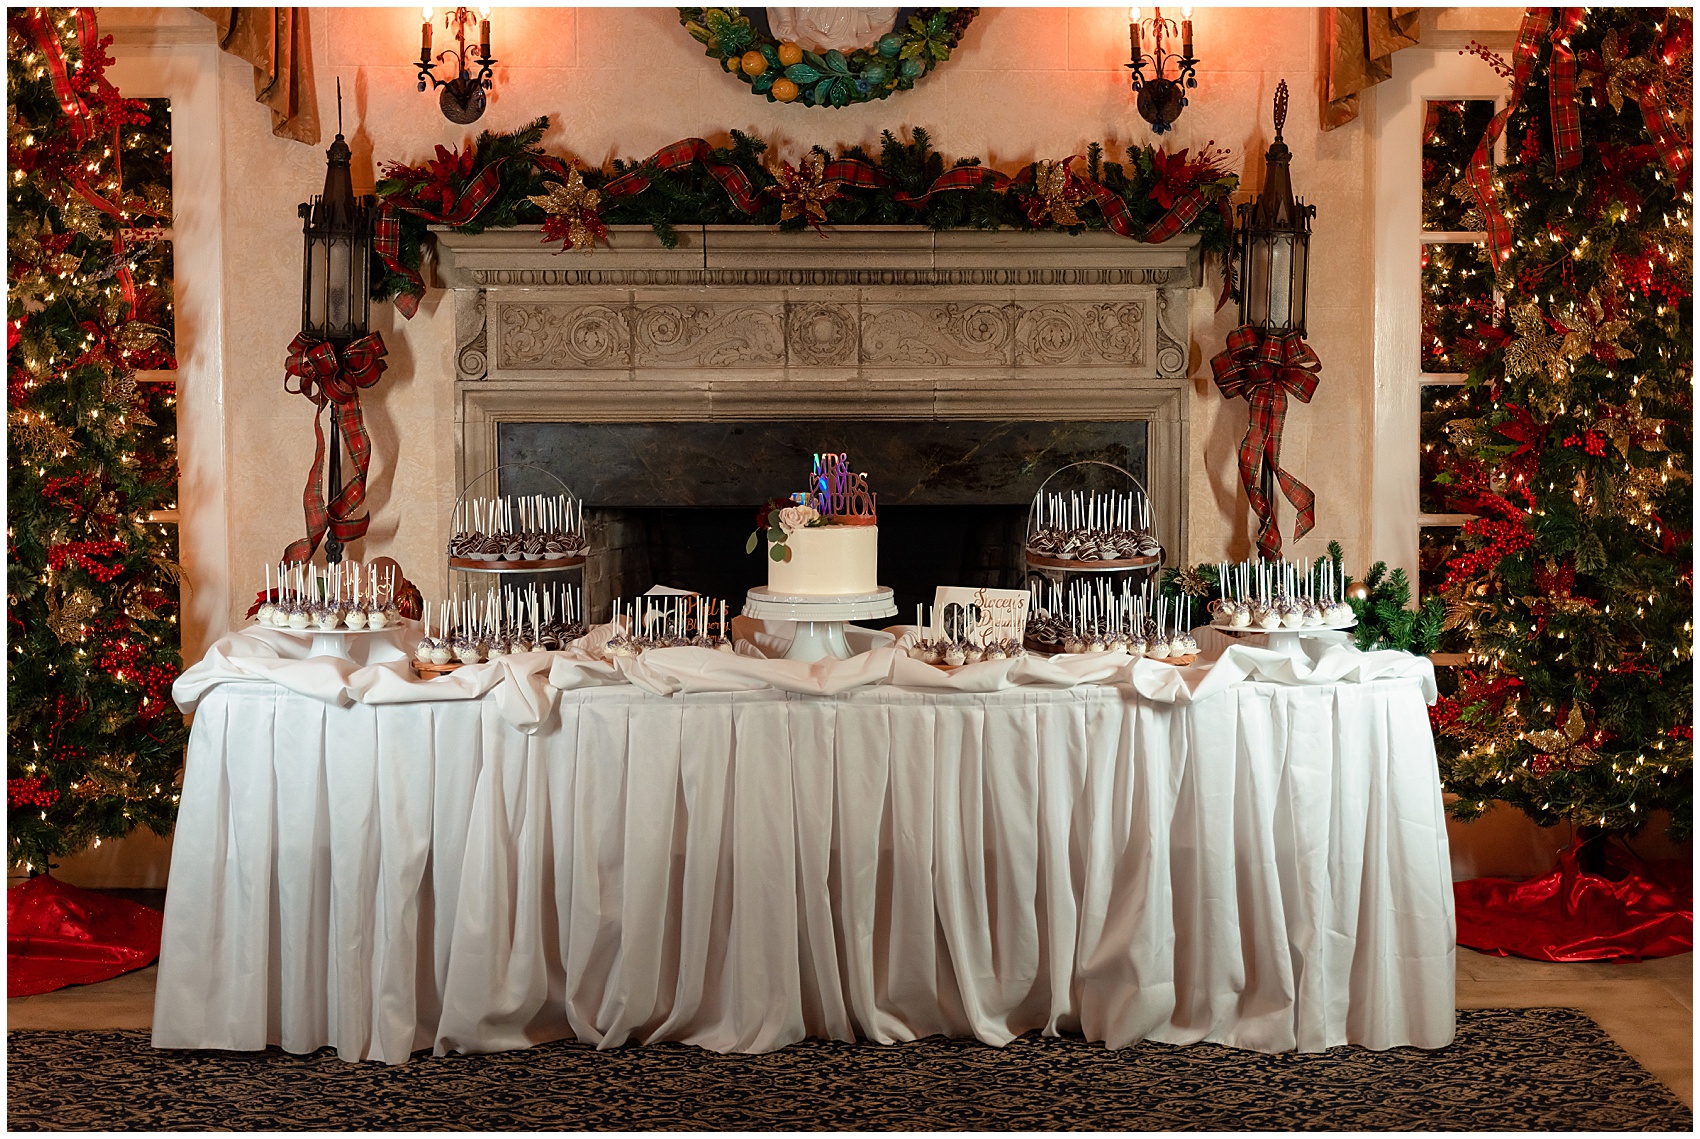 Details of a desert and cake table during a christmas wedding